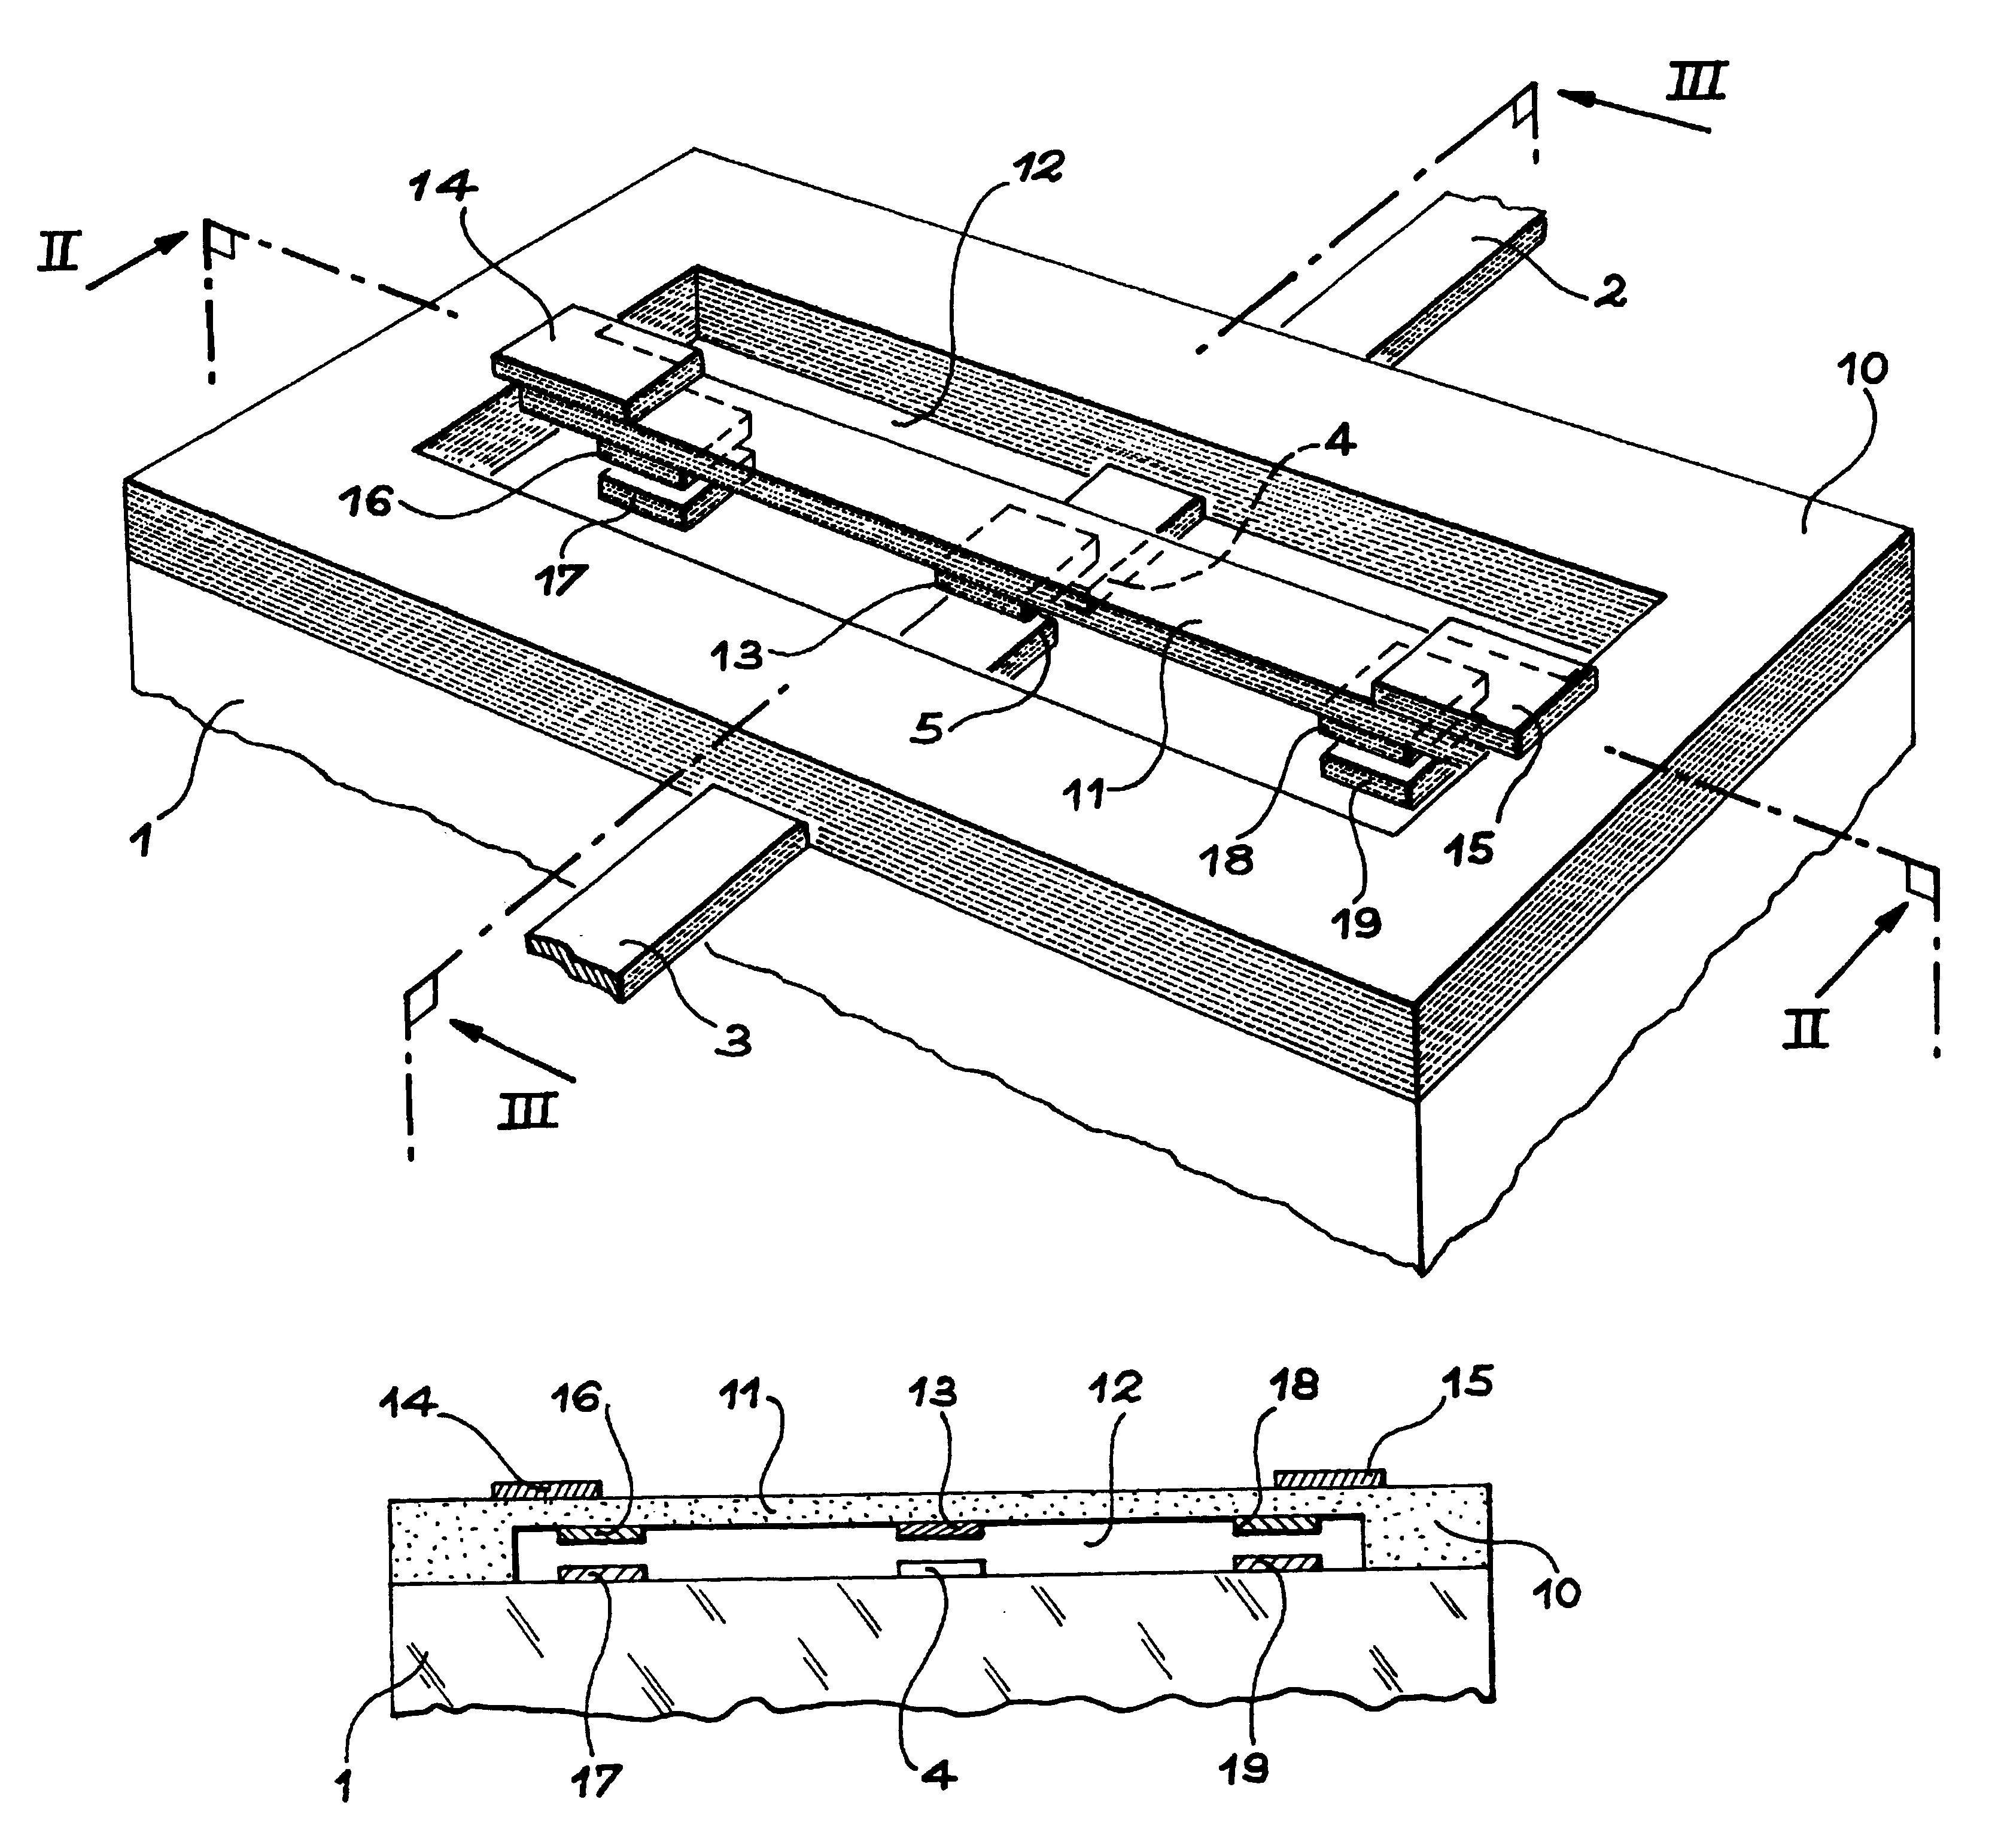 Micro-device with thermal actuator